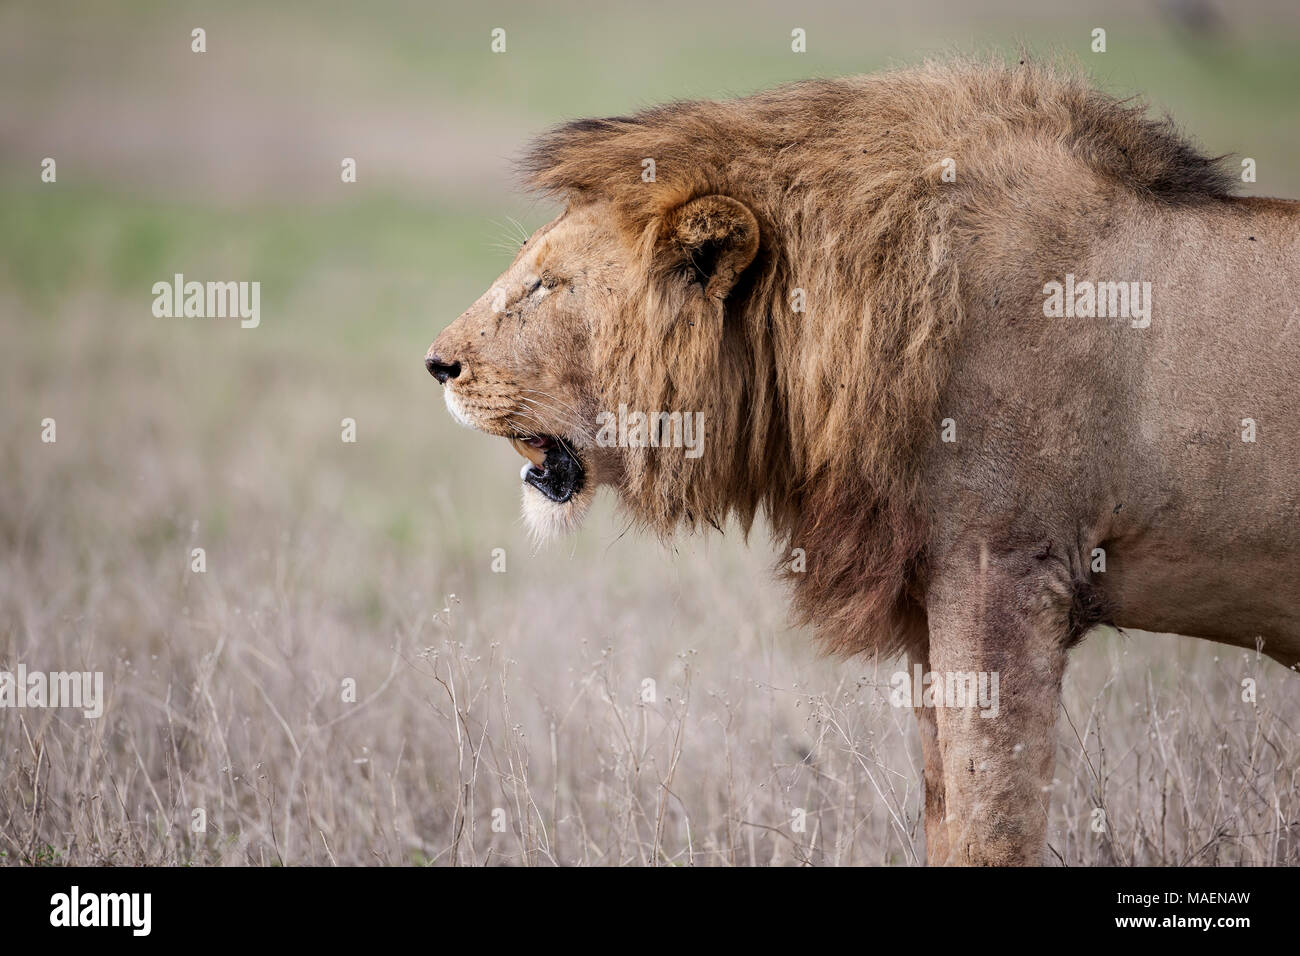 Male lion with mane Panthera leo adopting an aggressive posture to ward off intruders in Tanzania Stock Photo